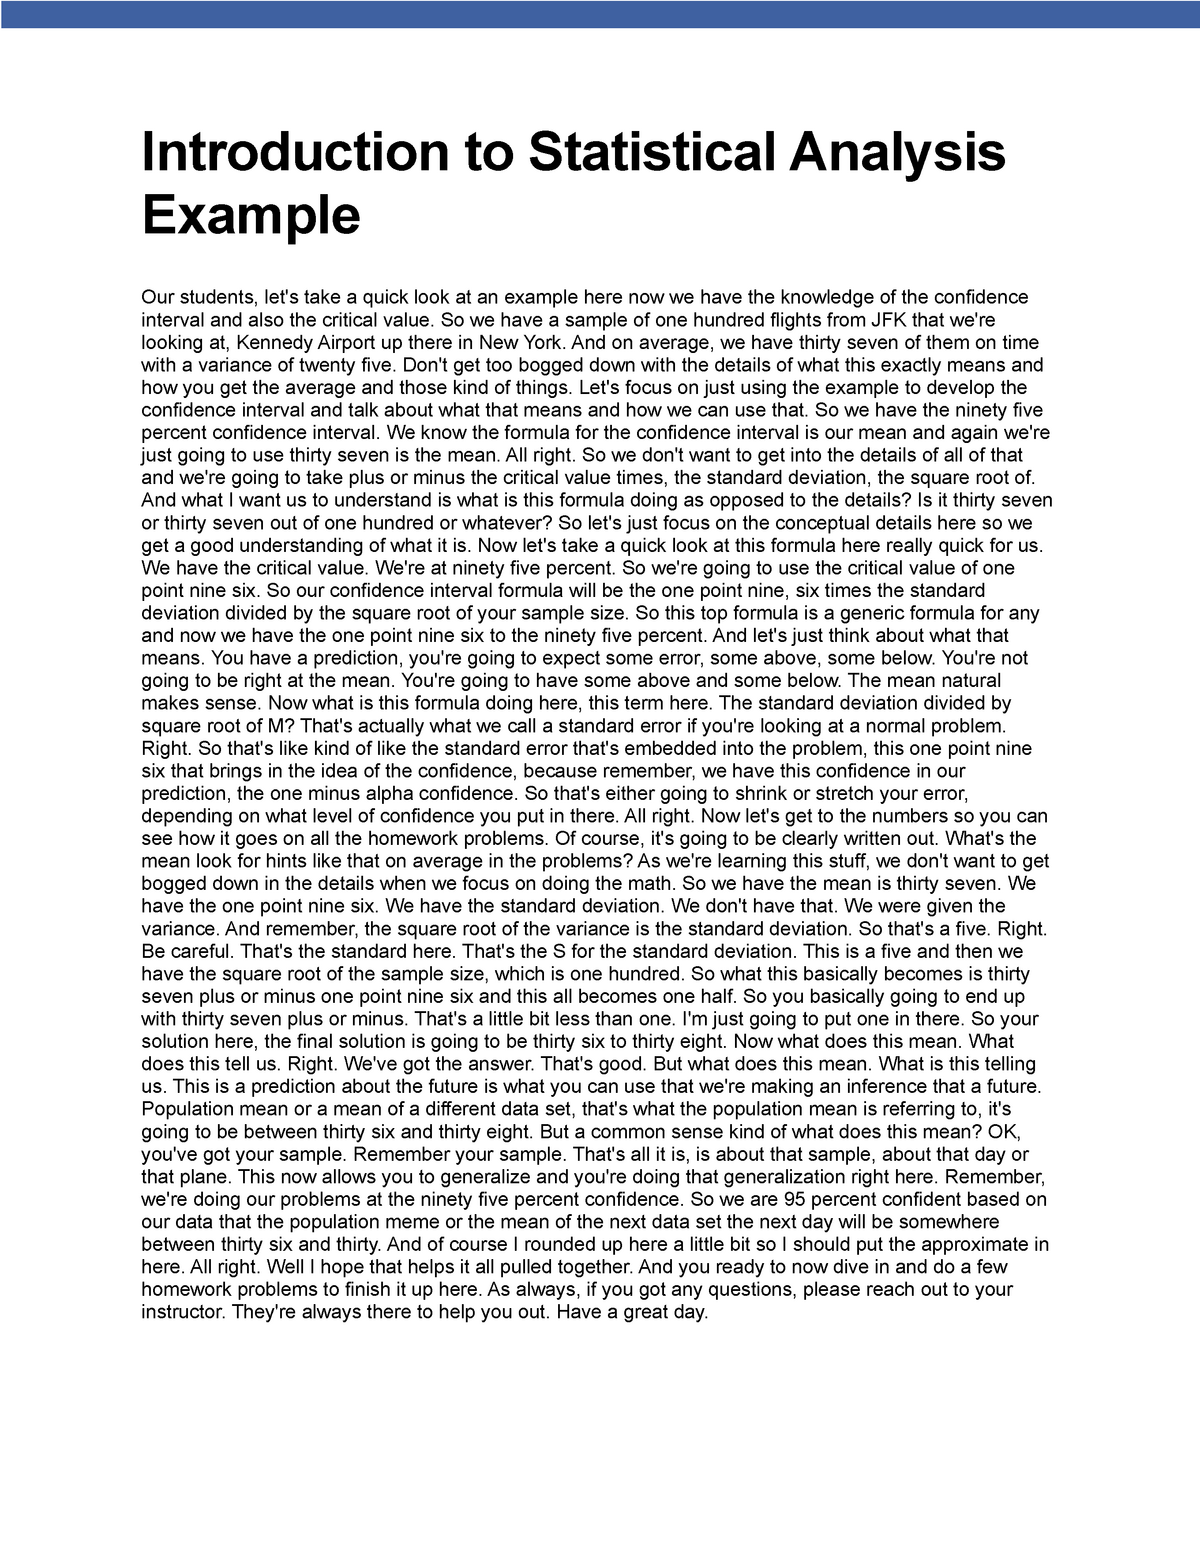 statistical analysis example essay